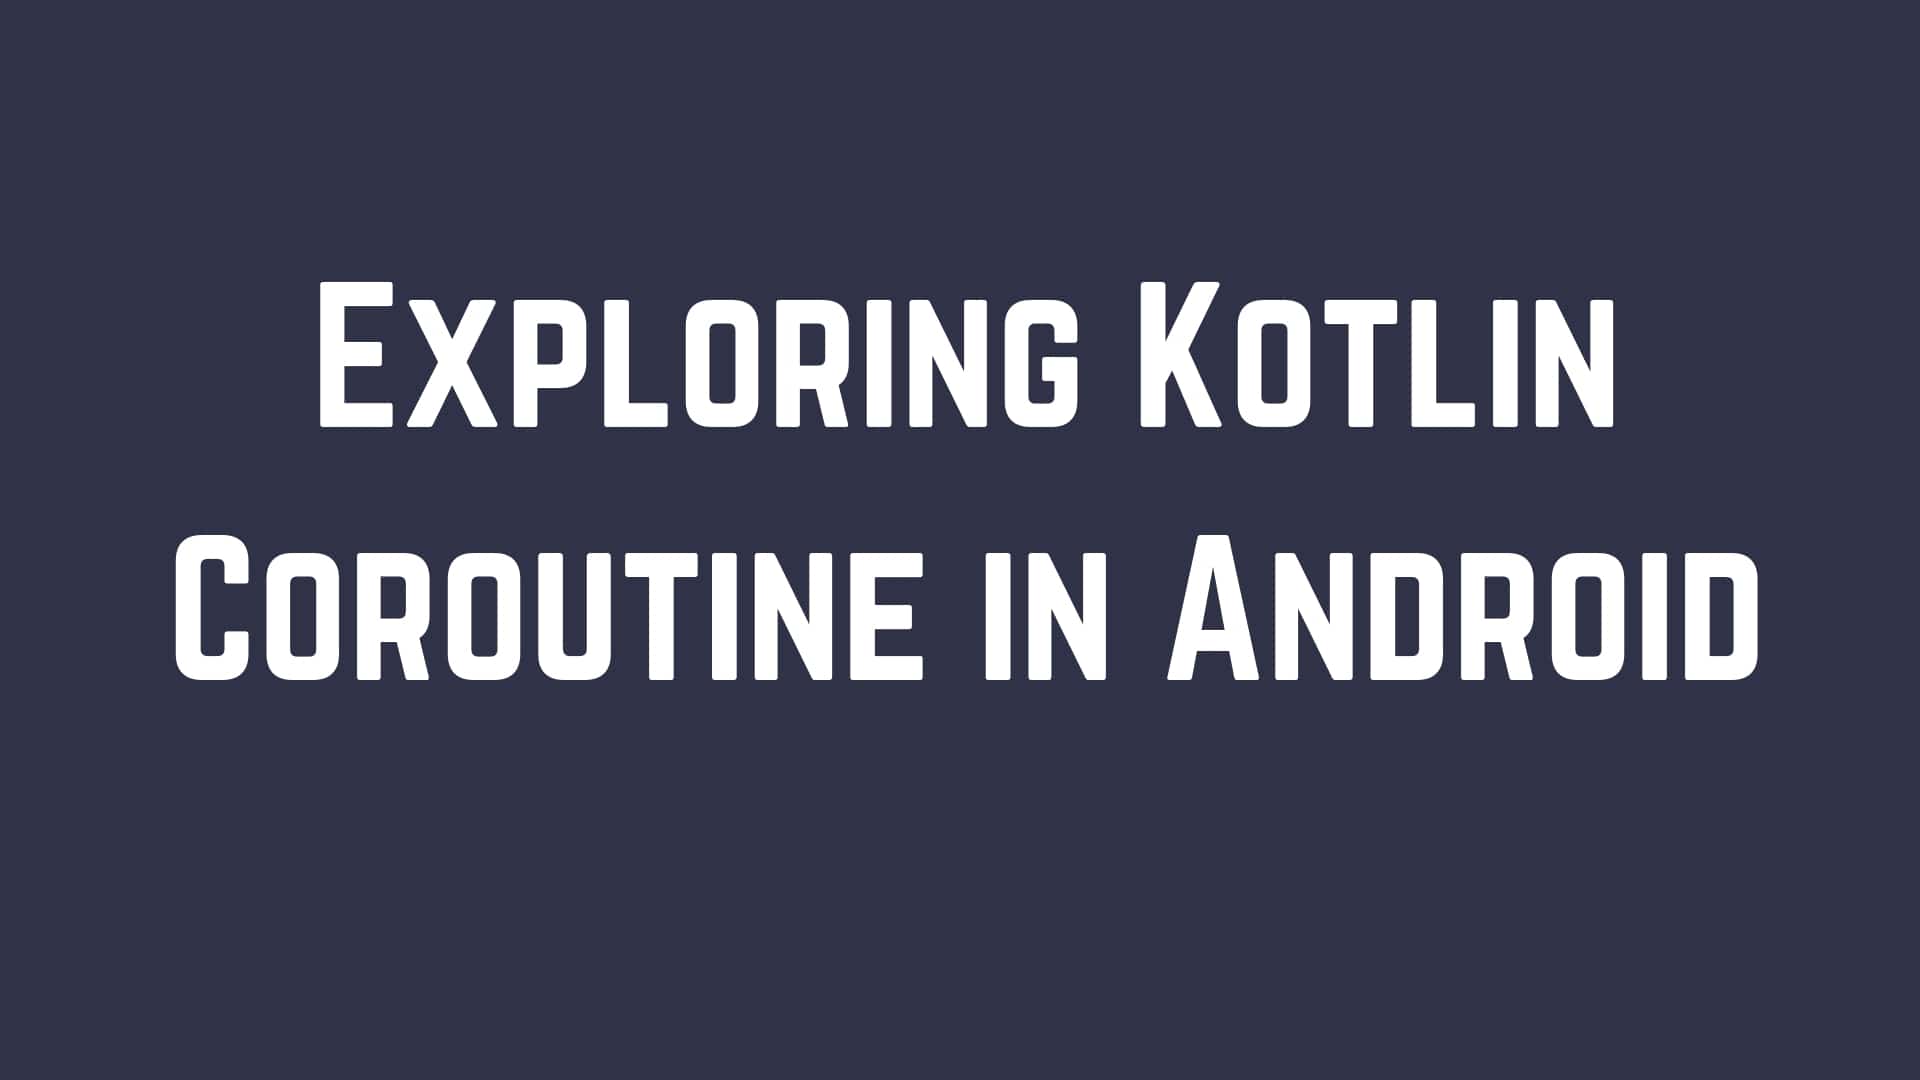 Kotlin Coroutine to get started in Android app developement